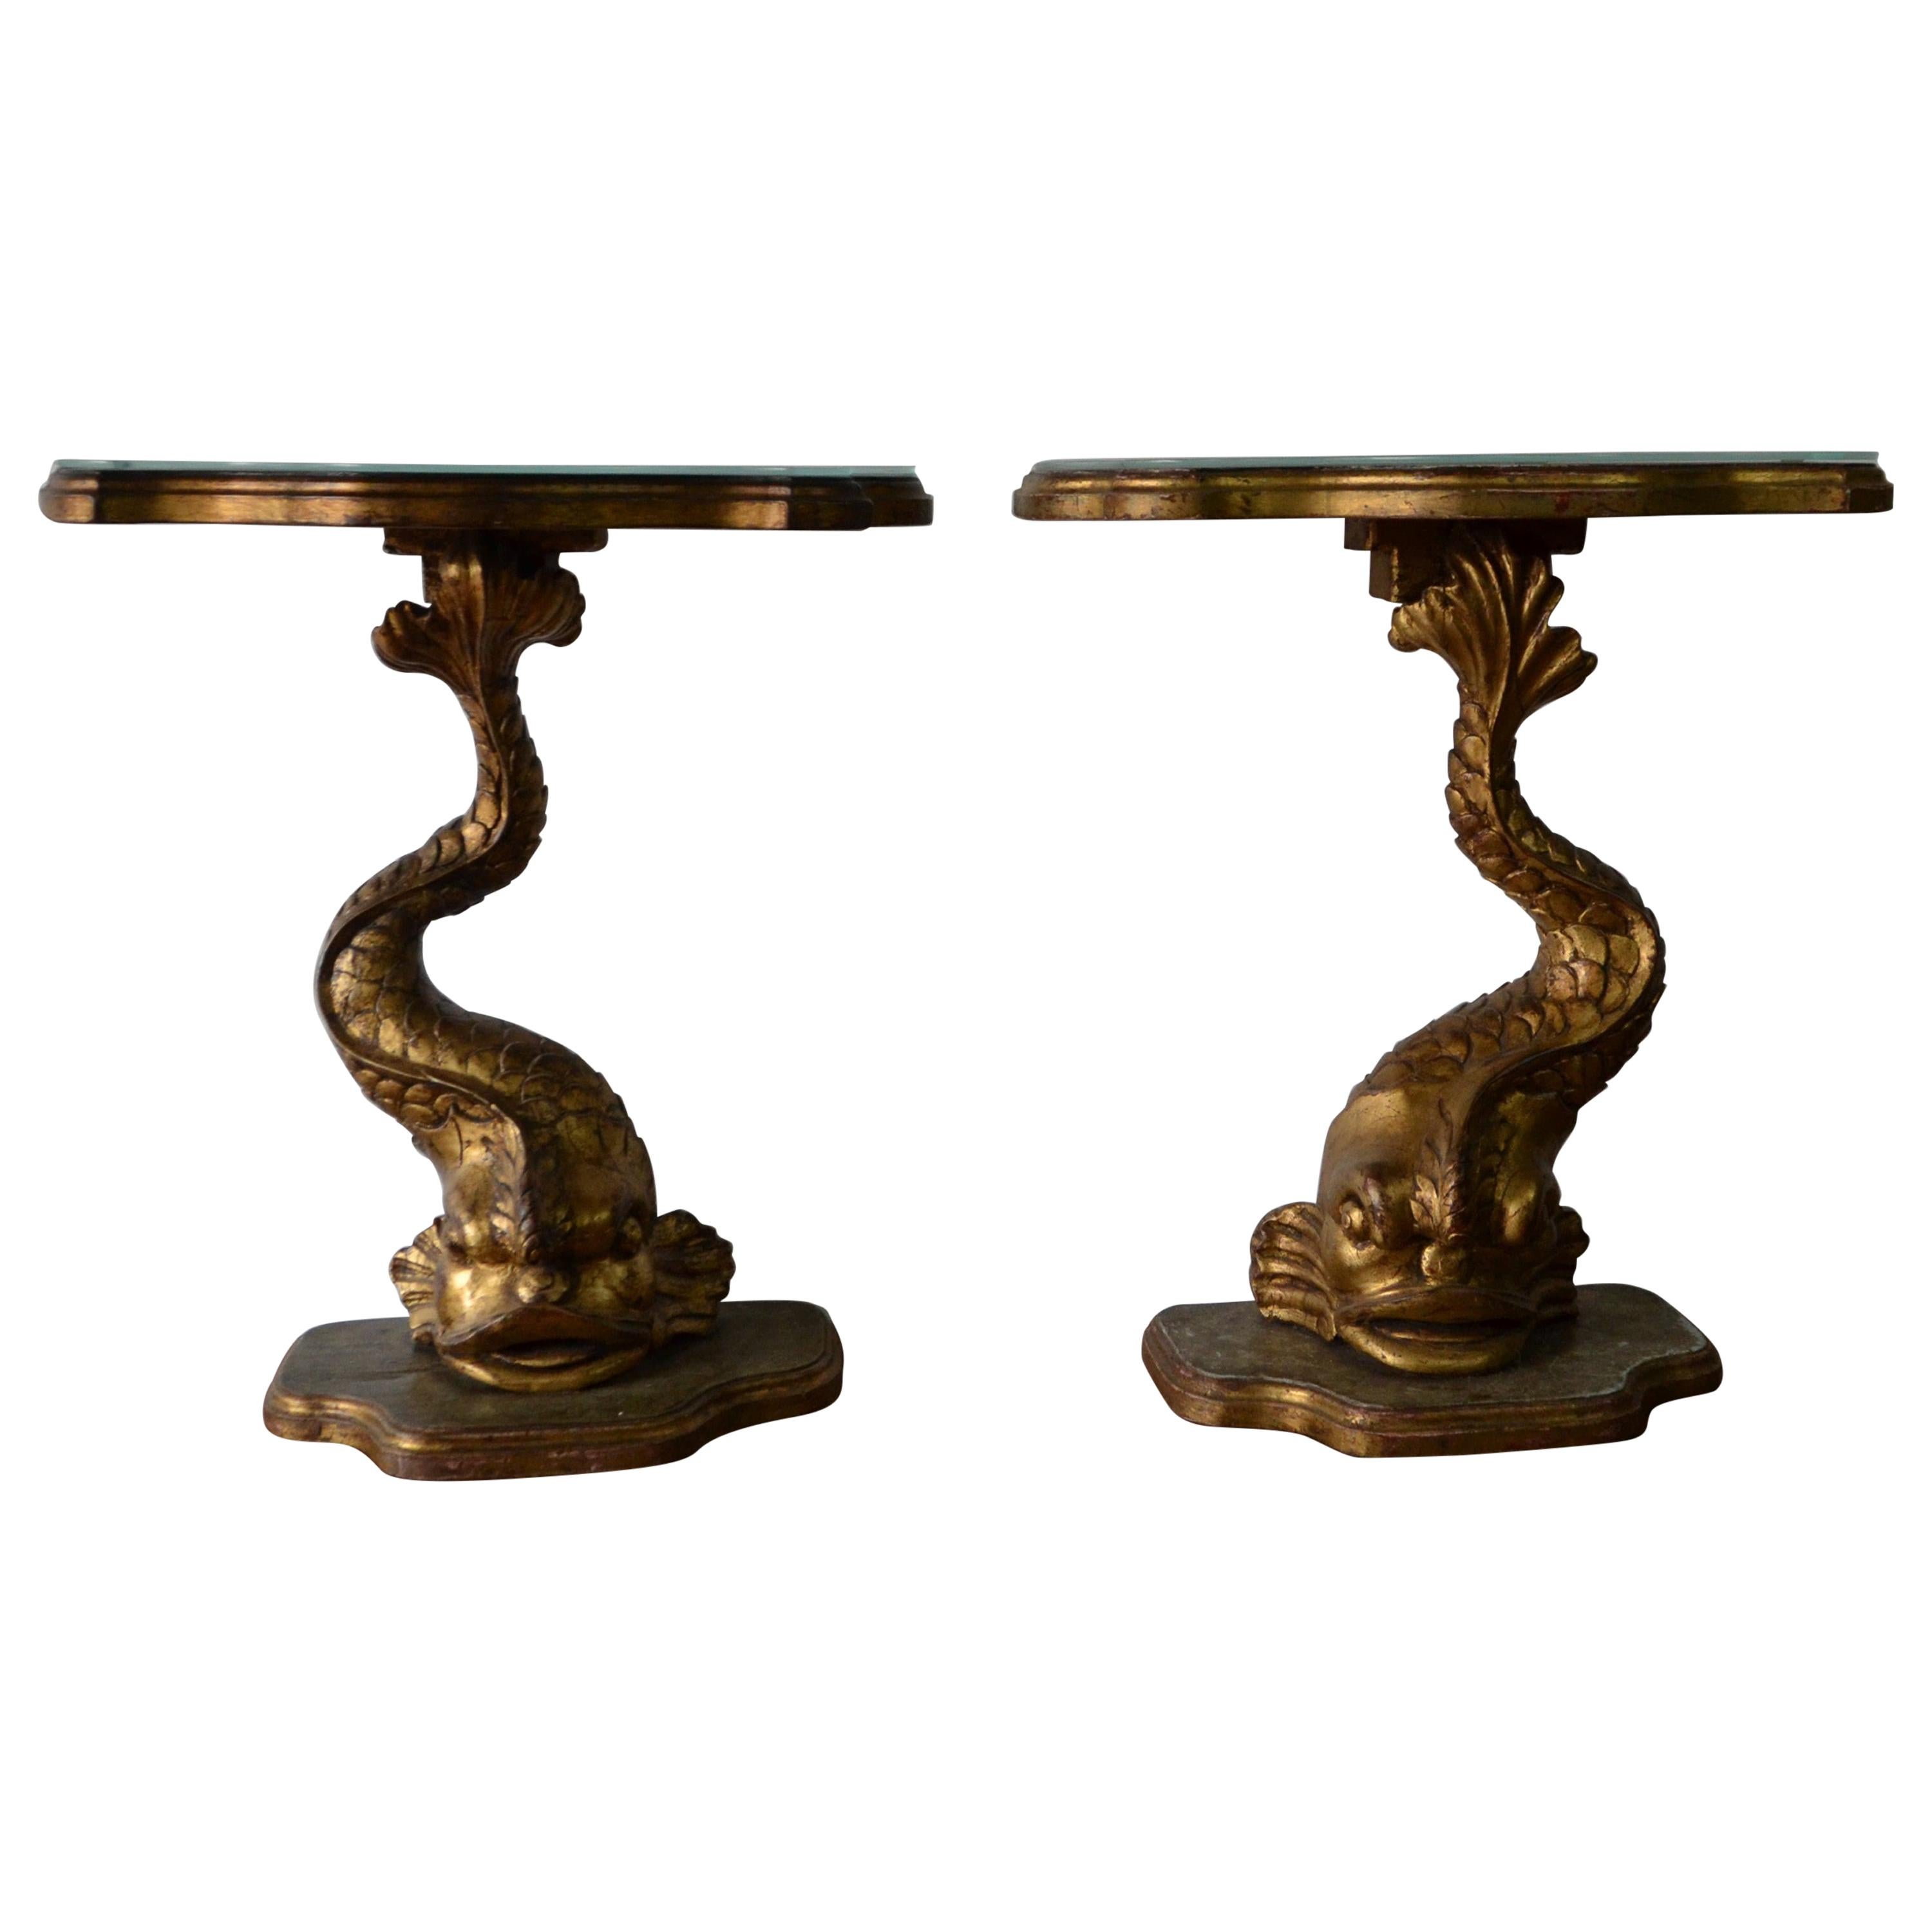 Pair of Gilt Finished Sea-Creature End Tables, Carved Wood